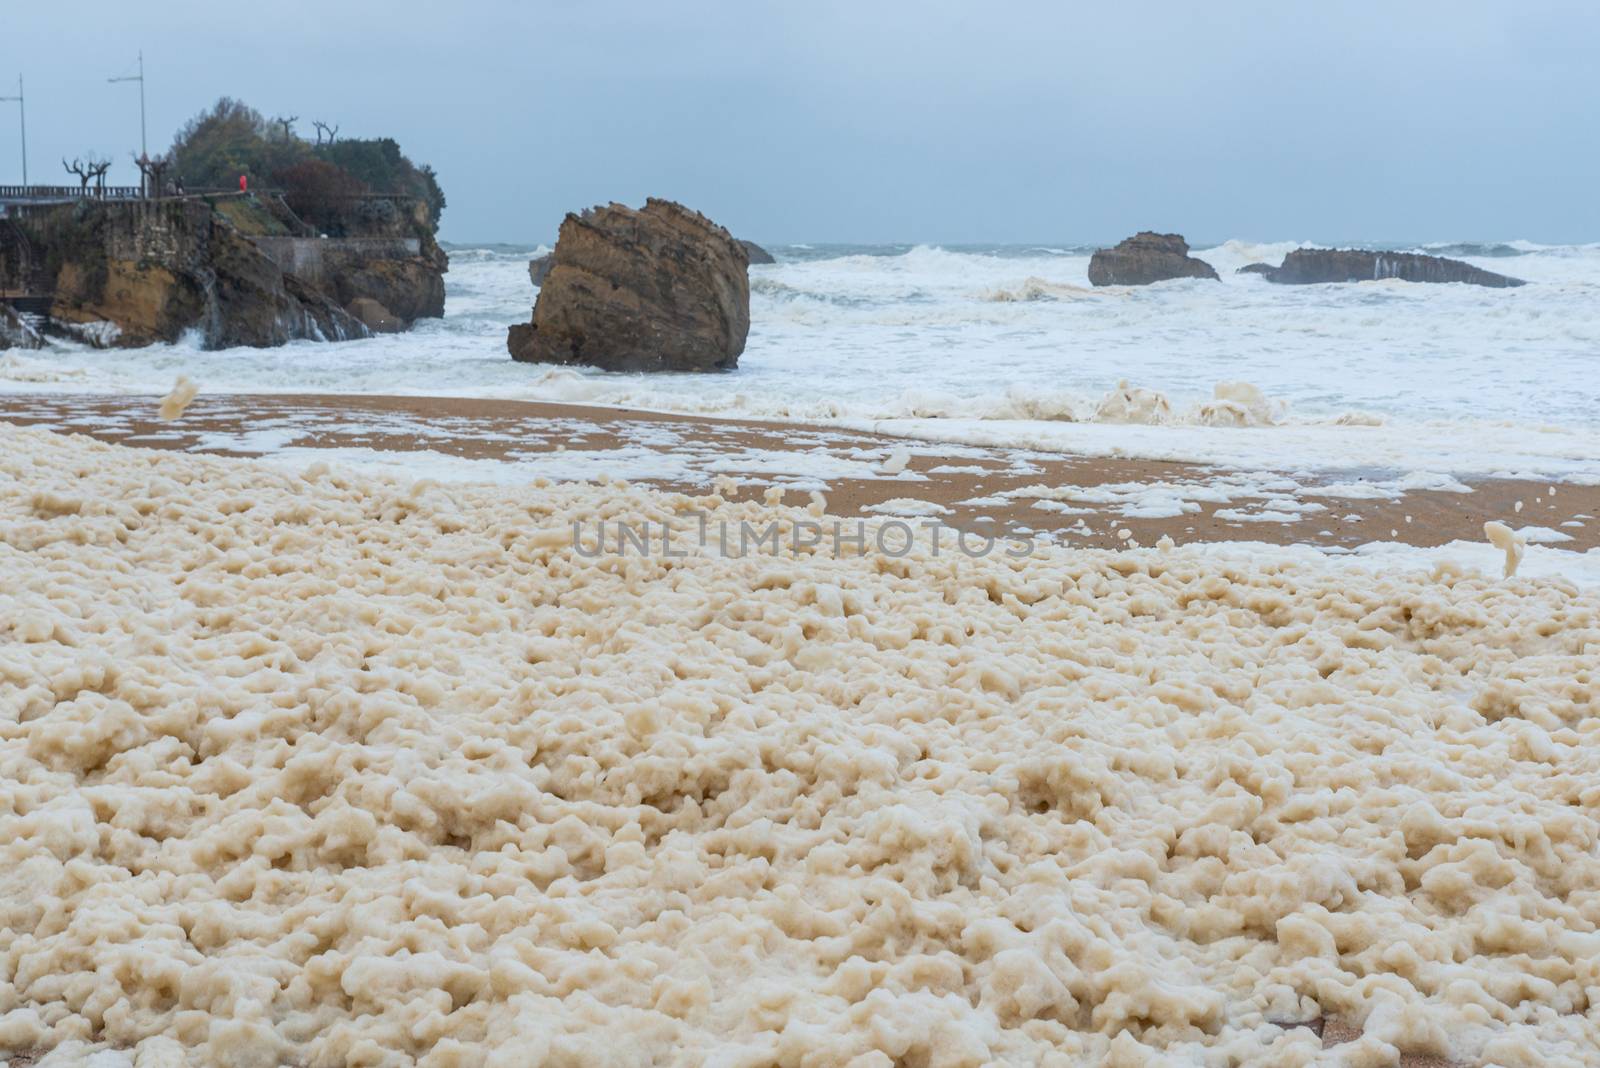 Foam on the Grande Plage beach and its quay, France by dutourdumonde